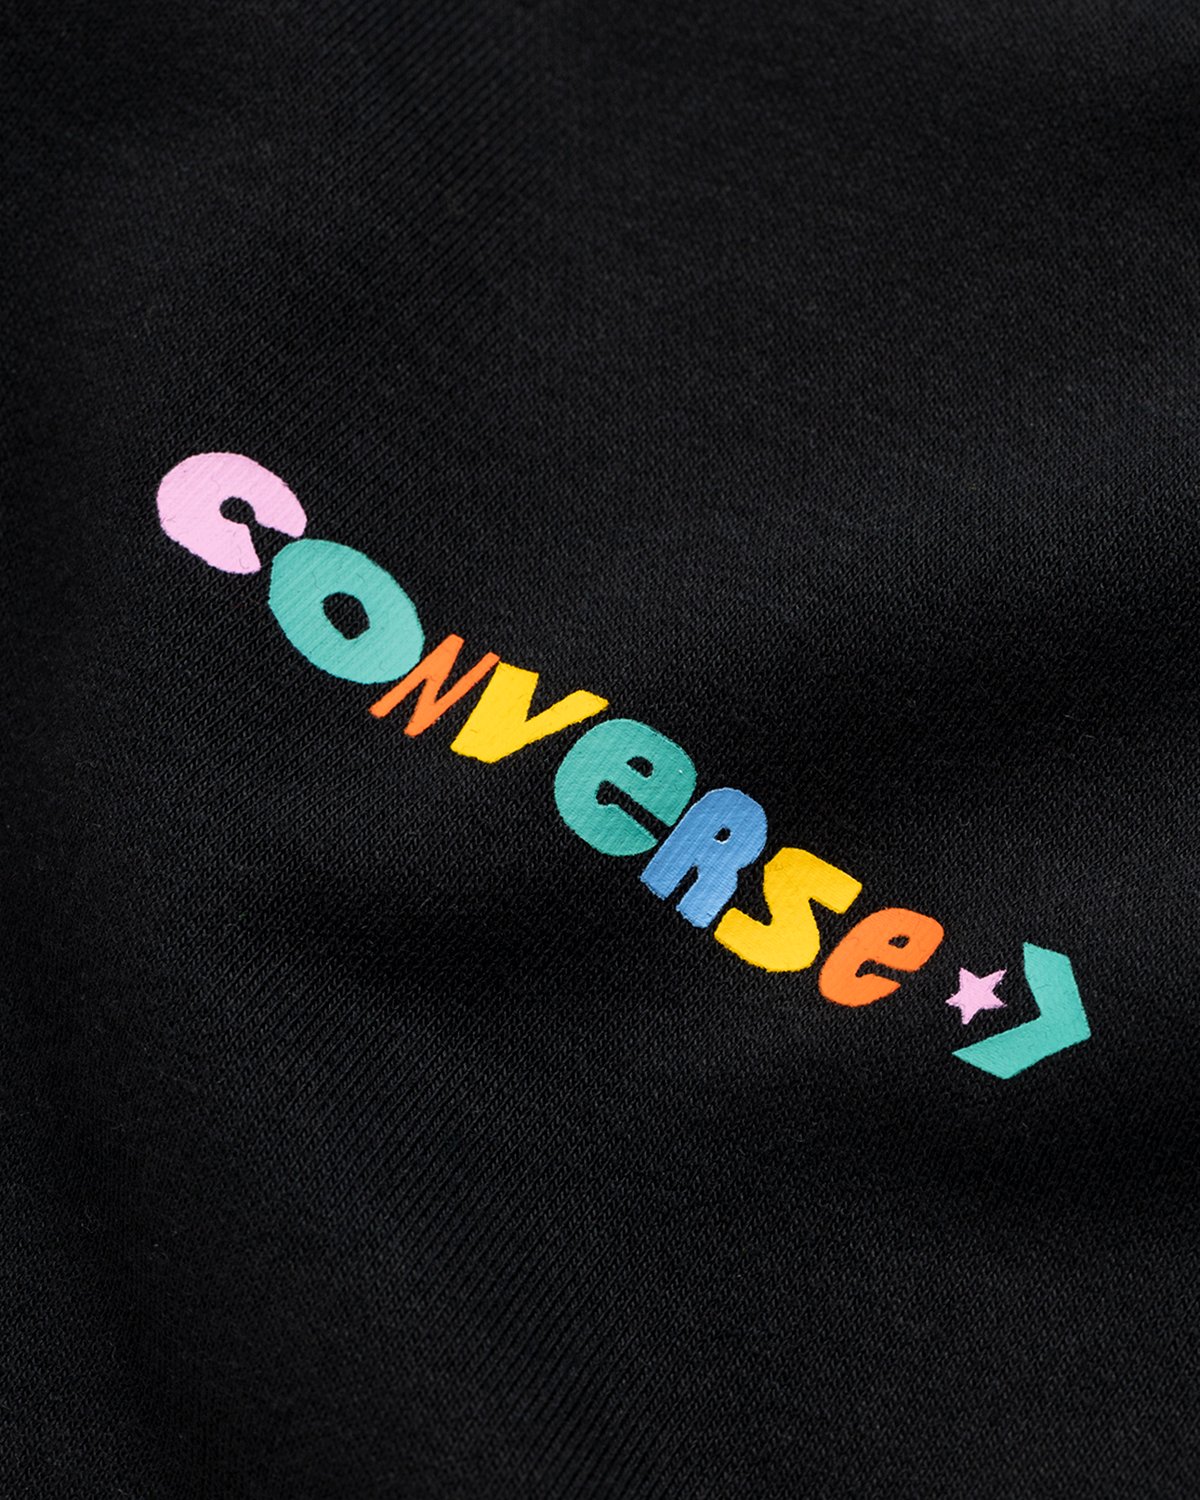 Converse - Much Love Graphic Hoodie Black - Clothing - Black - Image 6